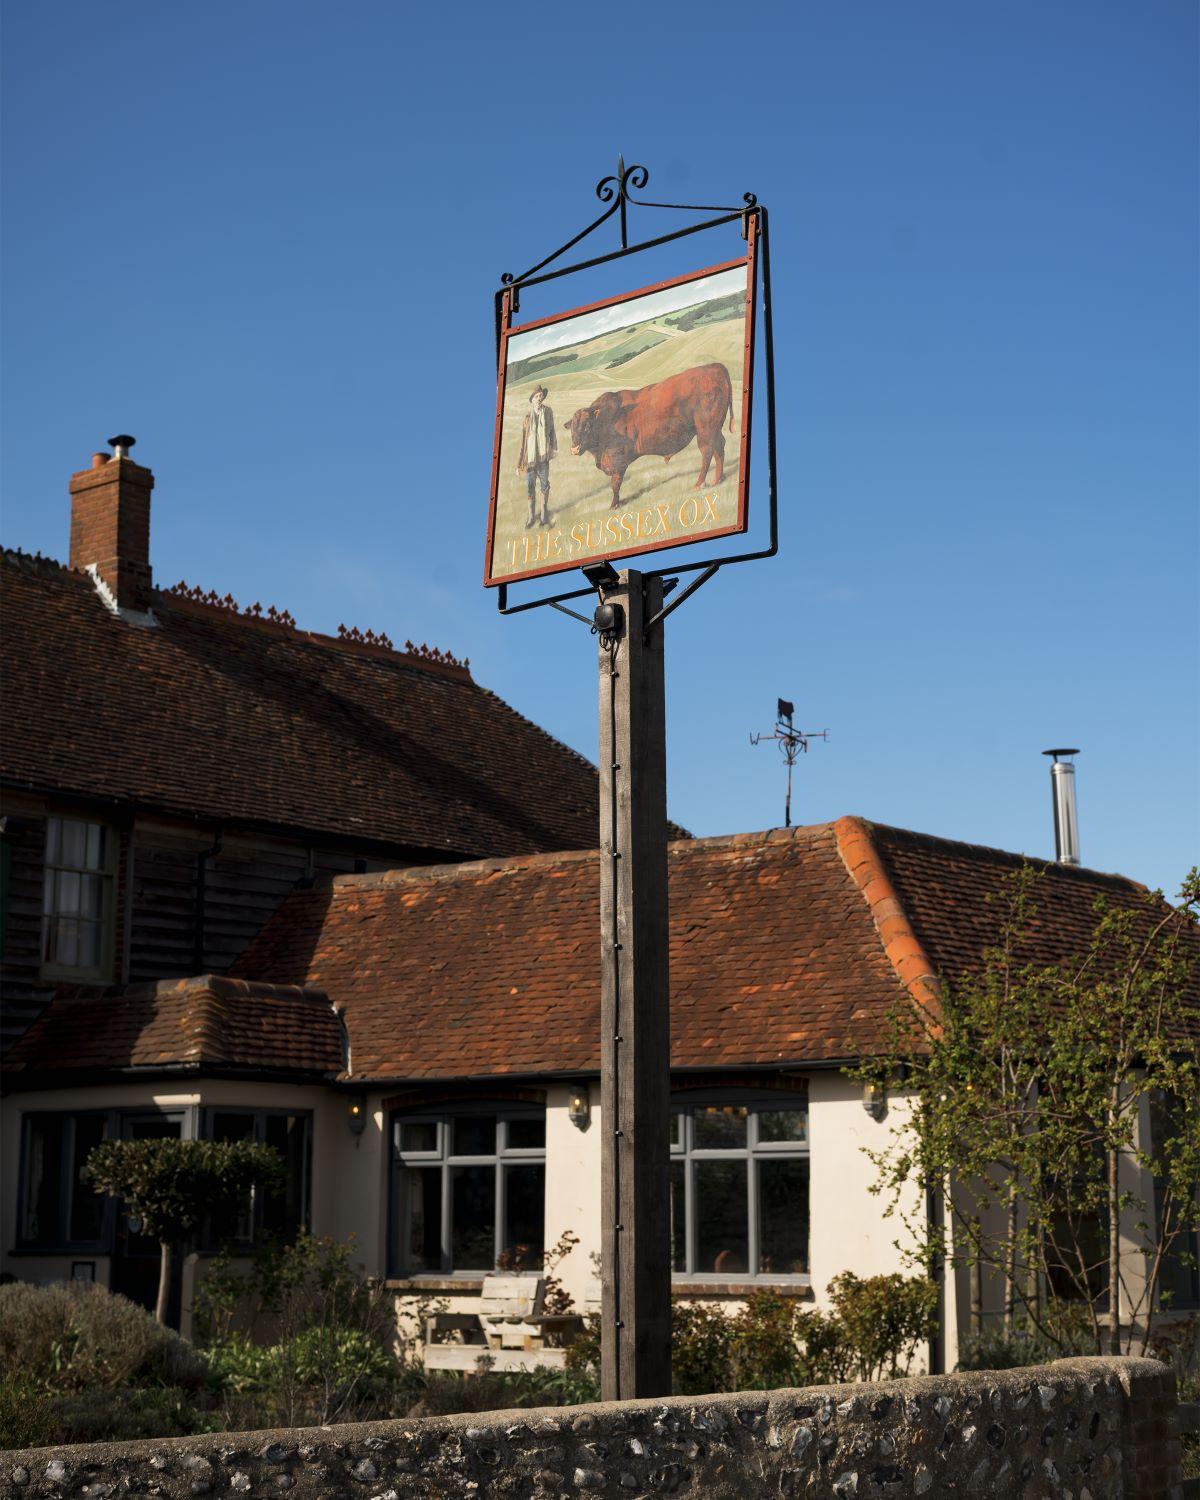 Images from The Sussex Ox